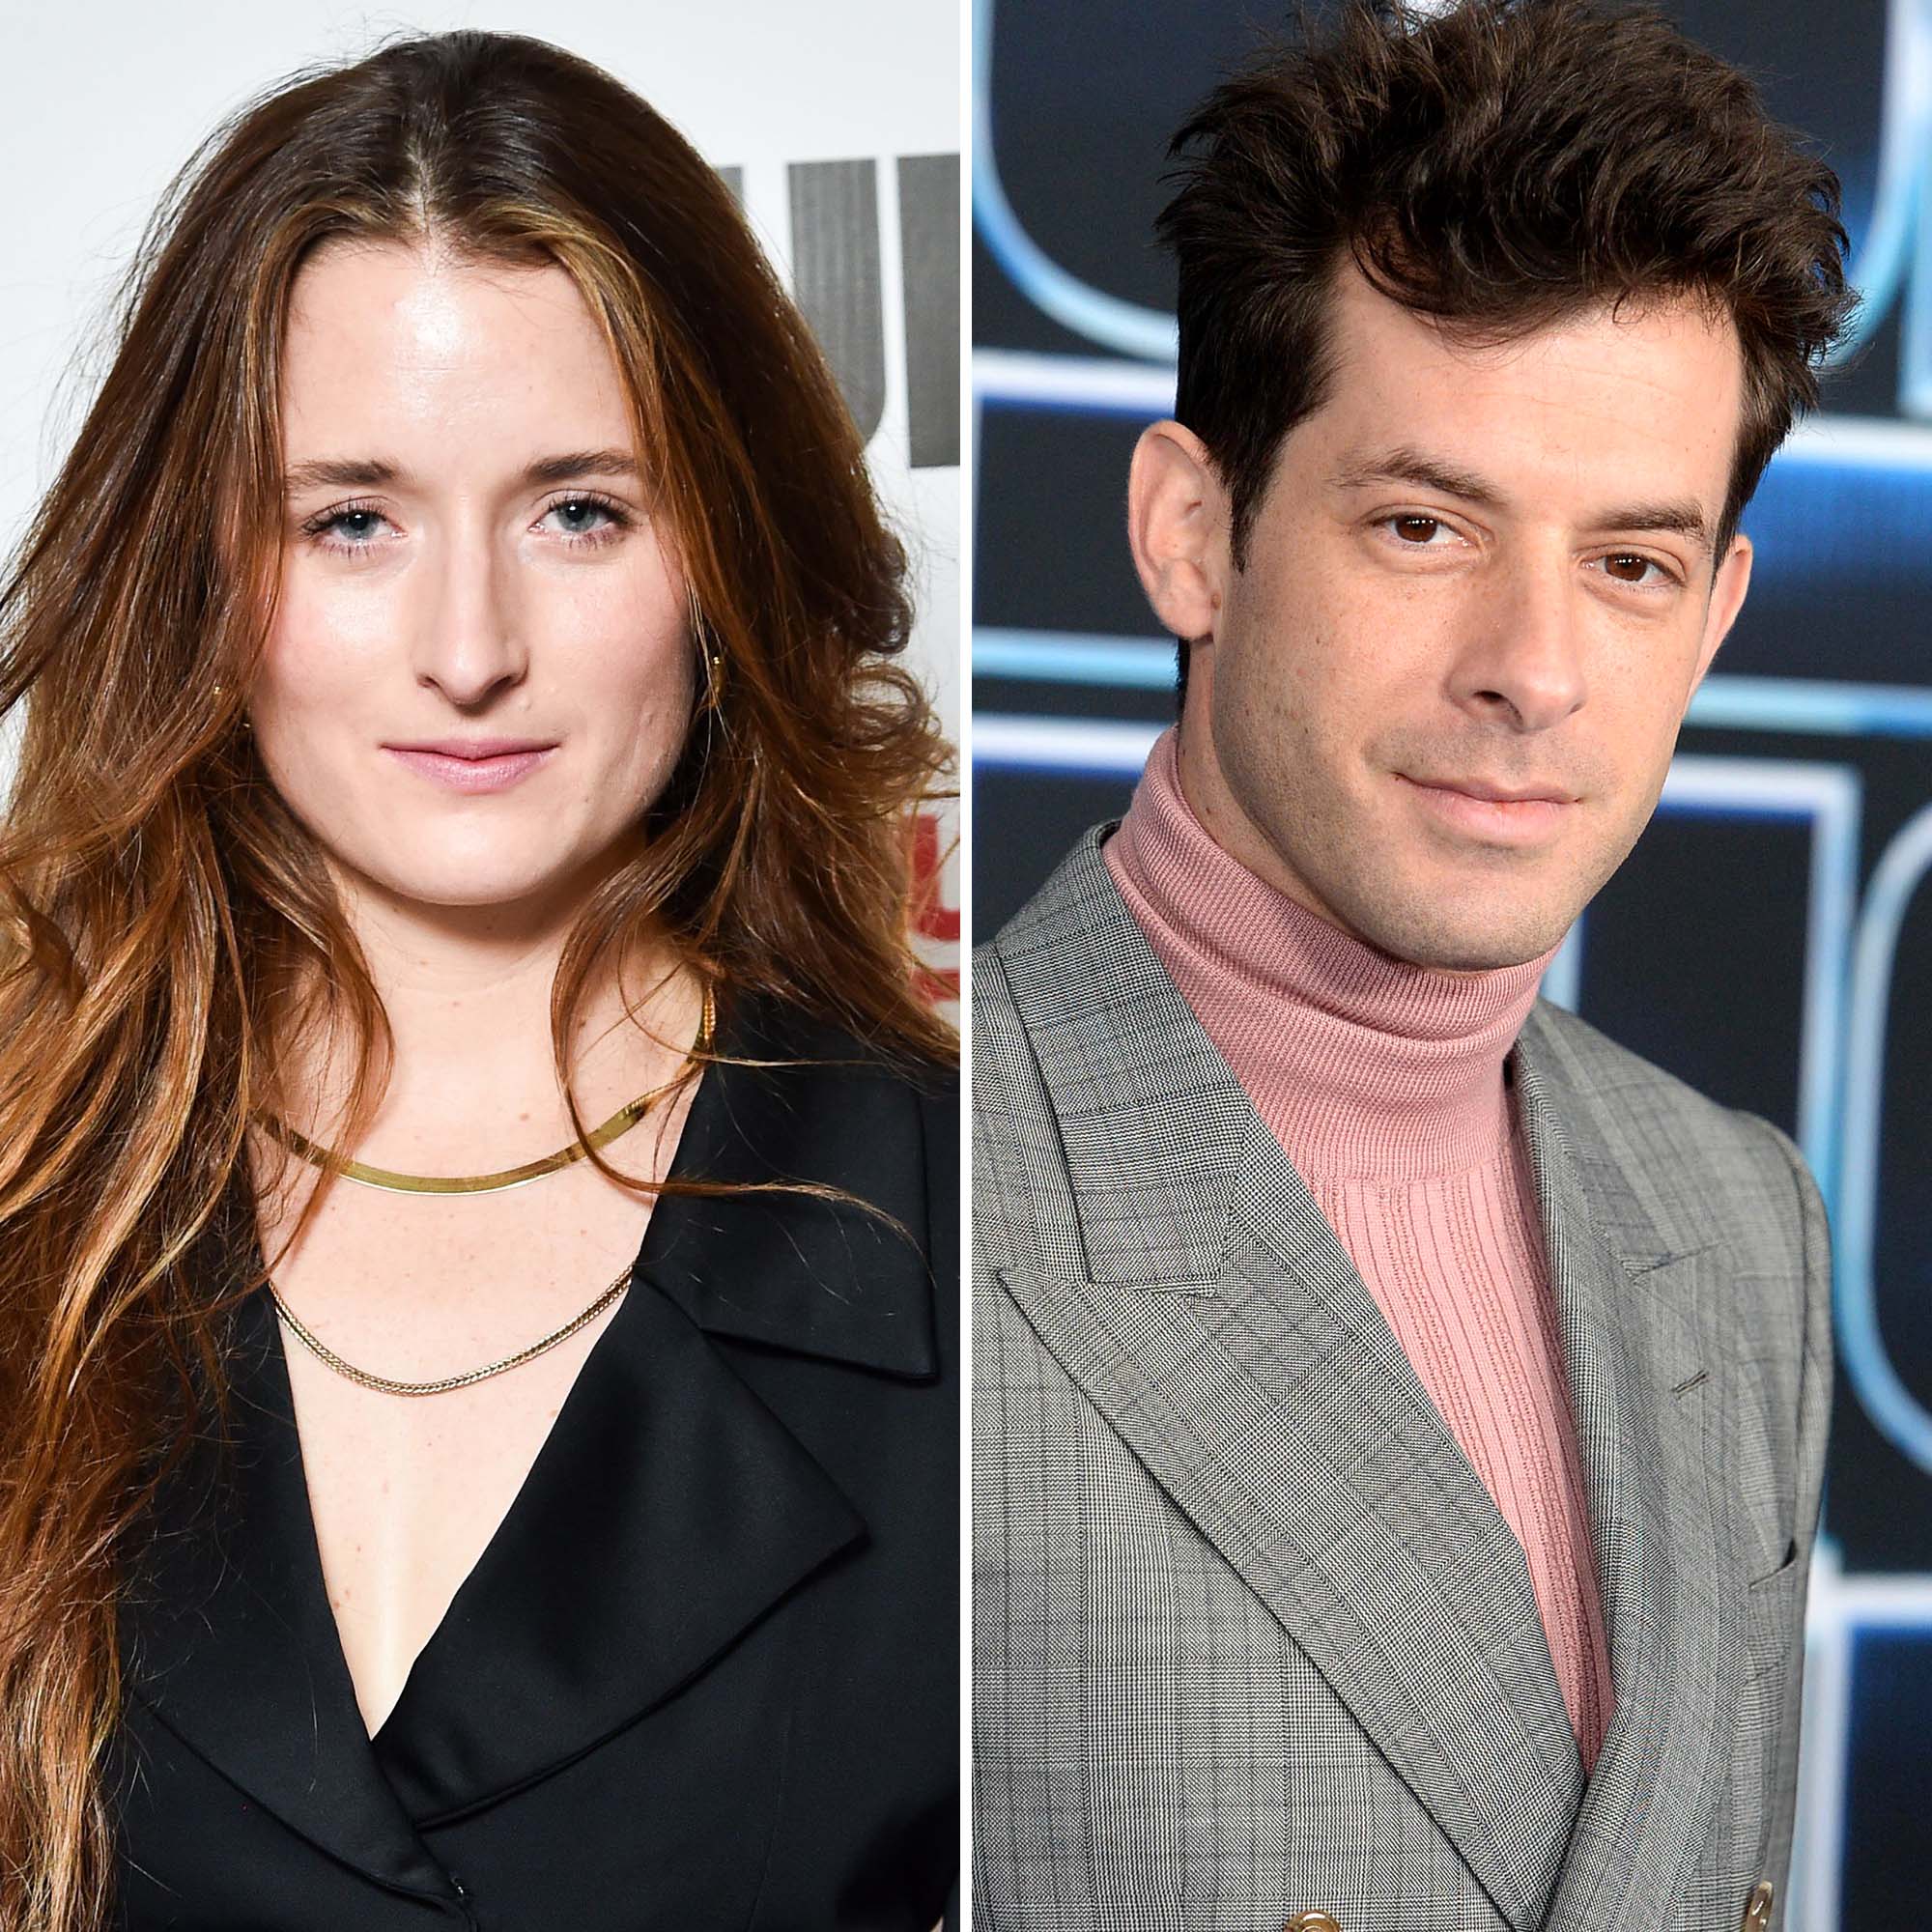 Grace Gummer and Mark Ronson Are Married: Details